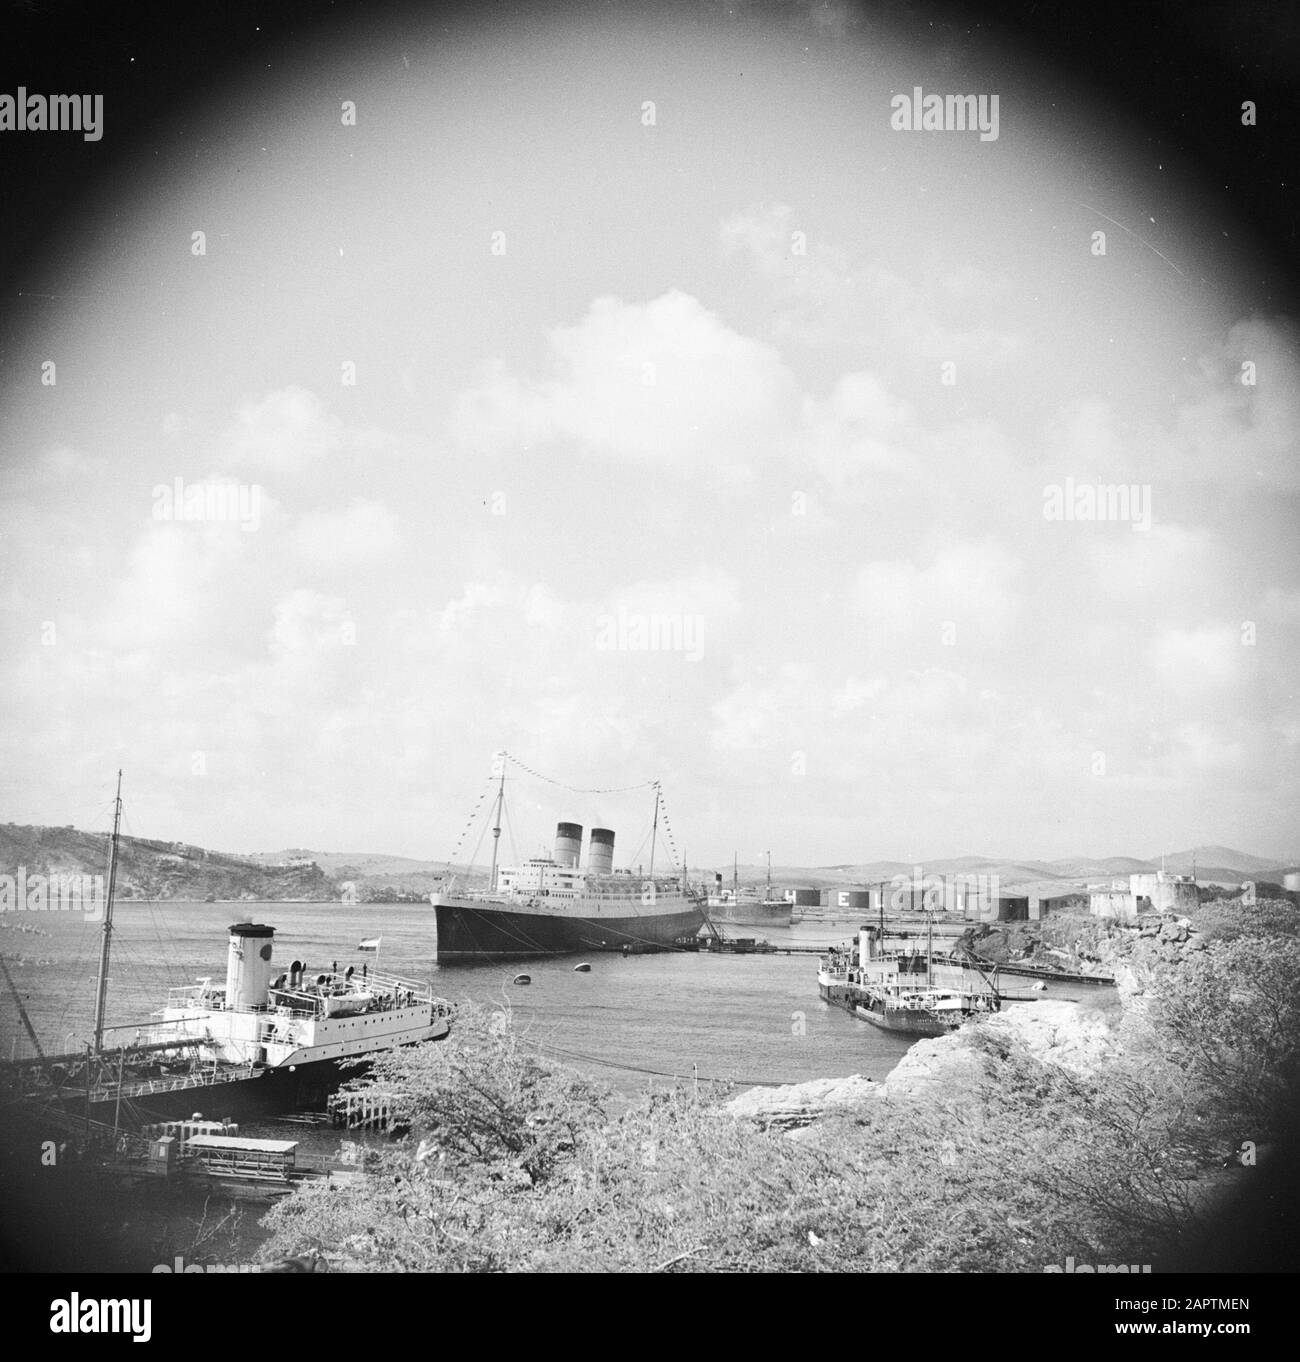 Journey to Suriname and the Netherlands Antilles  The ship de Mauretania in the Caracas Bay on Curaçao Date: 1947 Location: Curaçao Keywords: refineries, ships Stock Photo